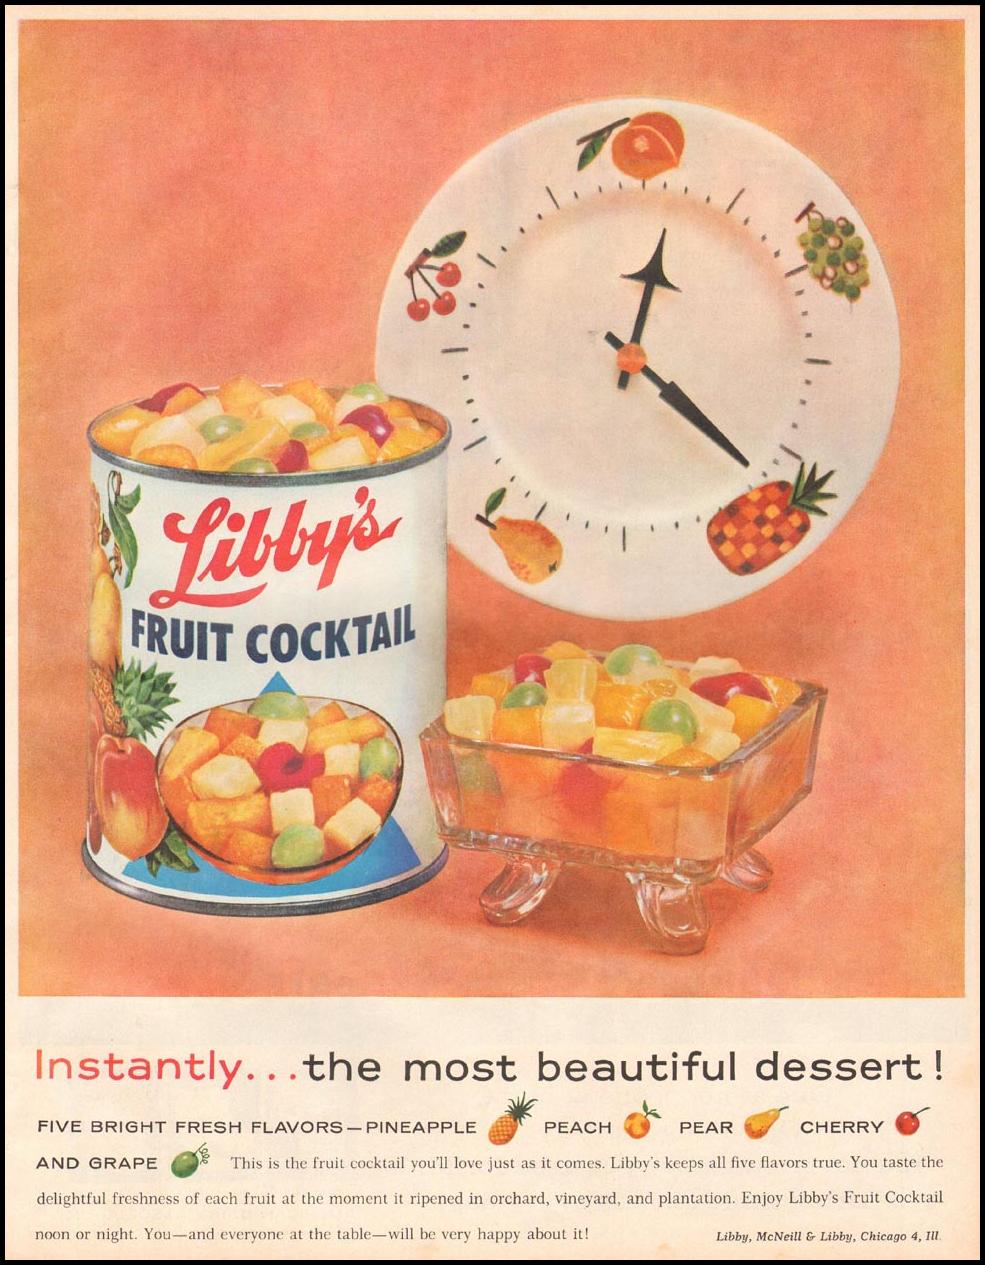 LIBBY'S FRUIT COCKTAIL
BETTER HOMES AND GARDENS
03/01/1960